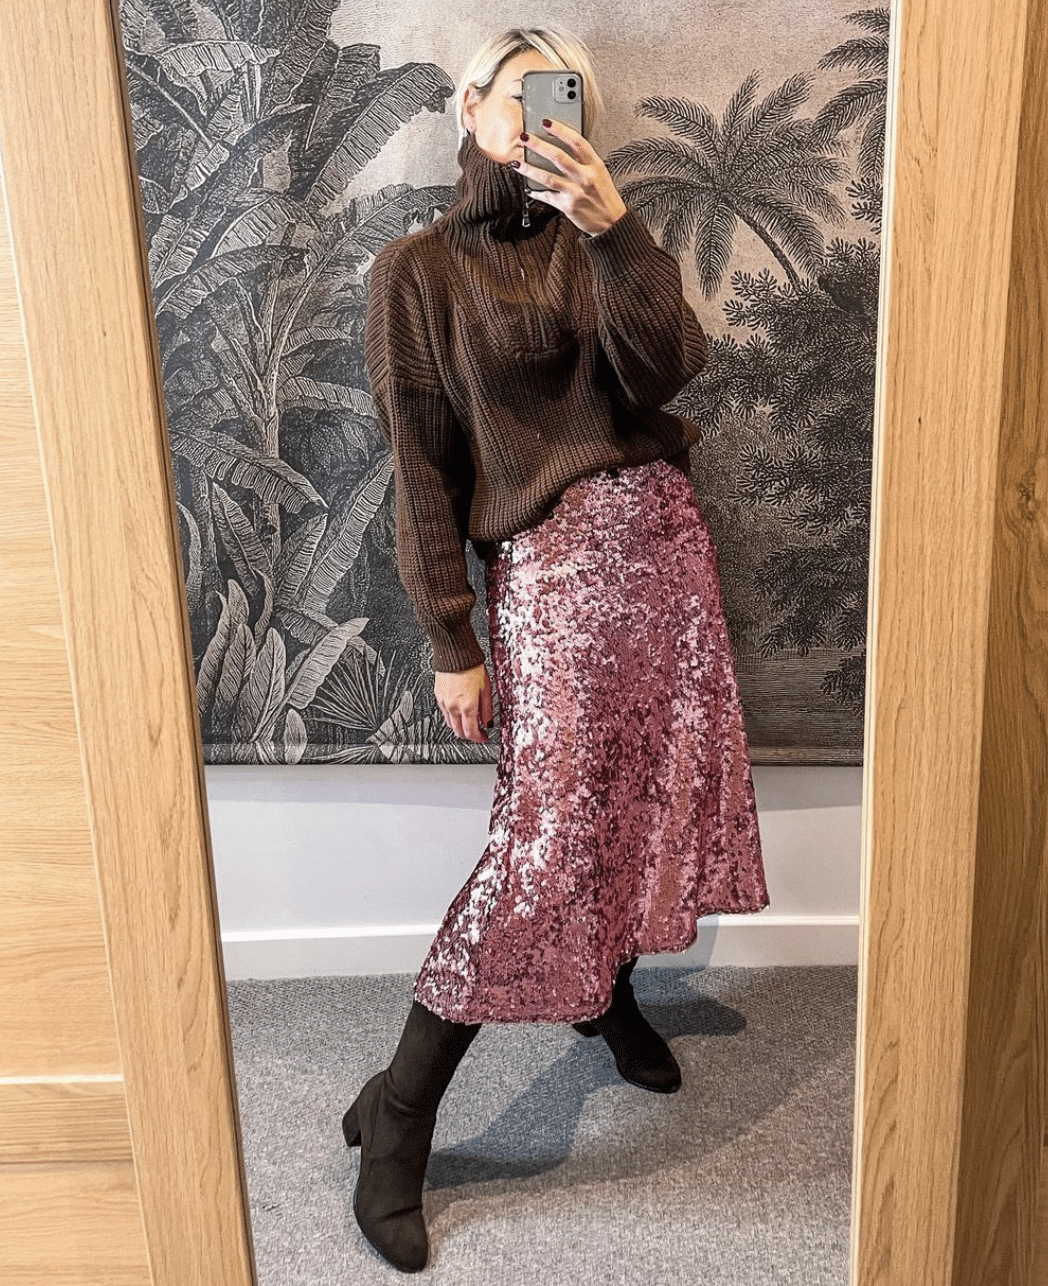 Brown-sweater-and-boots-sequin-skirt-outfit-1-1